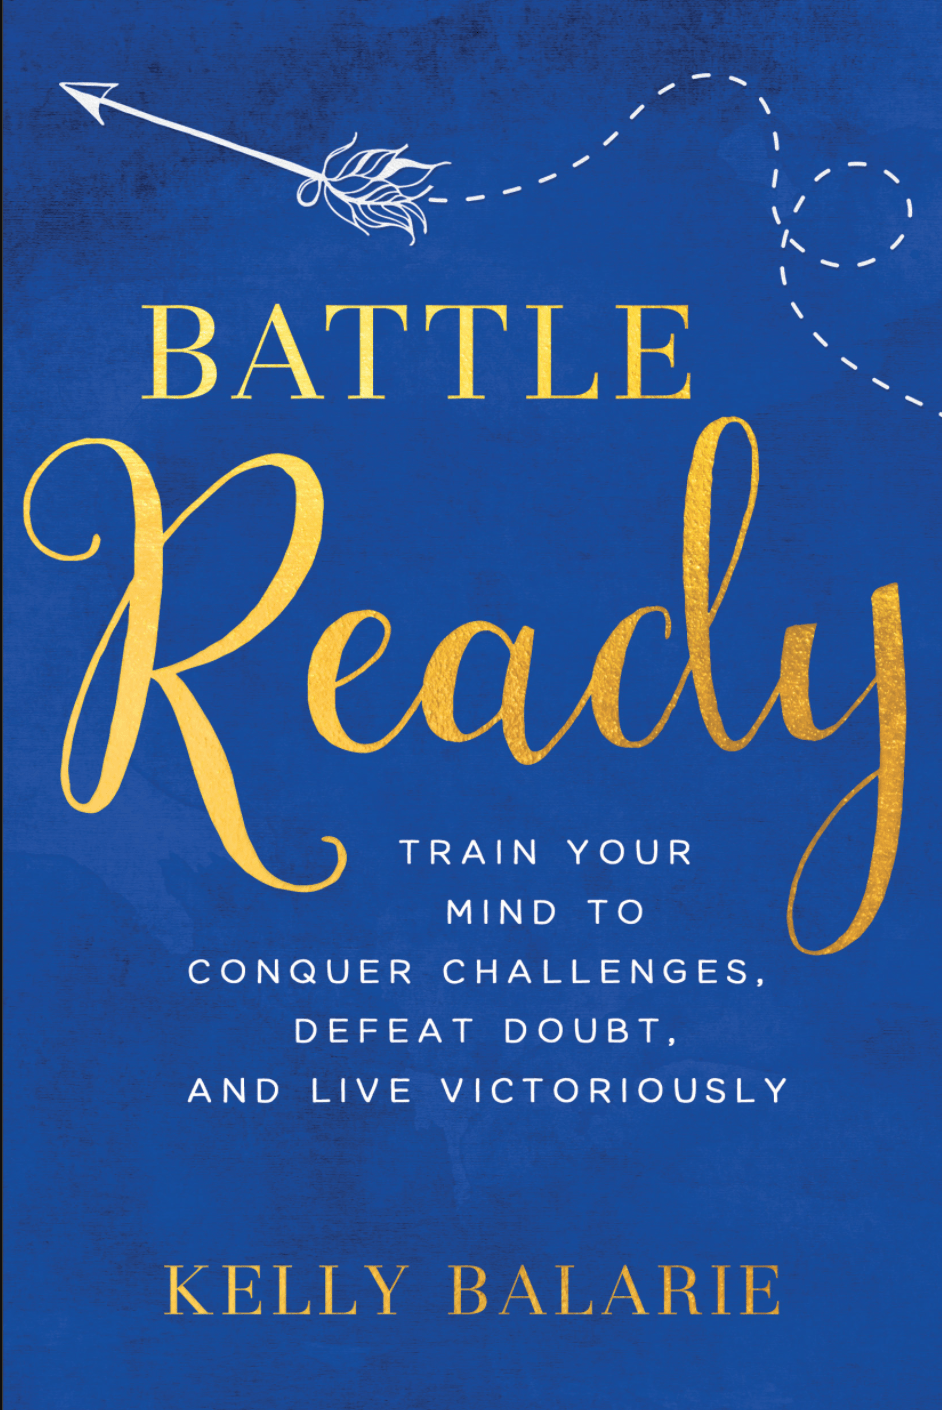 5 Tips to Being Battle Ready. Doubts, fears, and lies have kept me tied up and have kept me from living life. Want to know how to fight these battles in your mind? Become battle ready! #battleready #kellybalarie #overcoming #fear #doubt #struggles #negativethinking